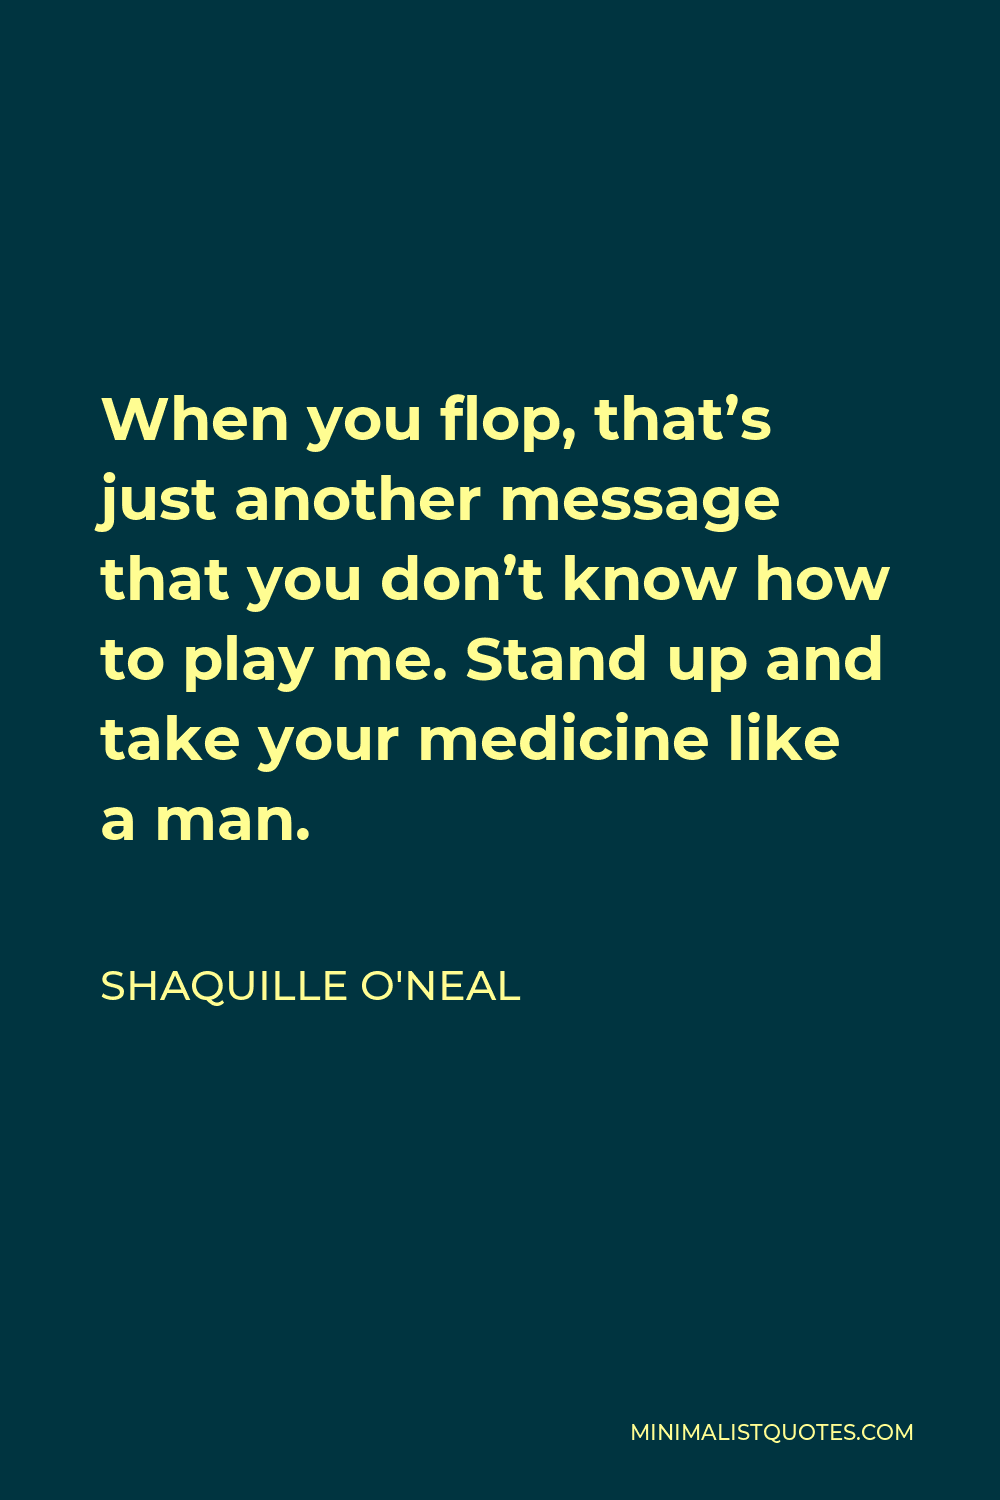 Shaquille O'Neal Quote - When you flop, that’s just another message that you don’t know how to play me. Stand up and take your medicine like a man.